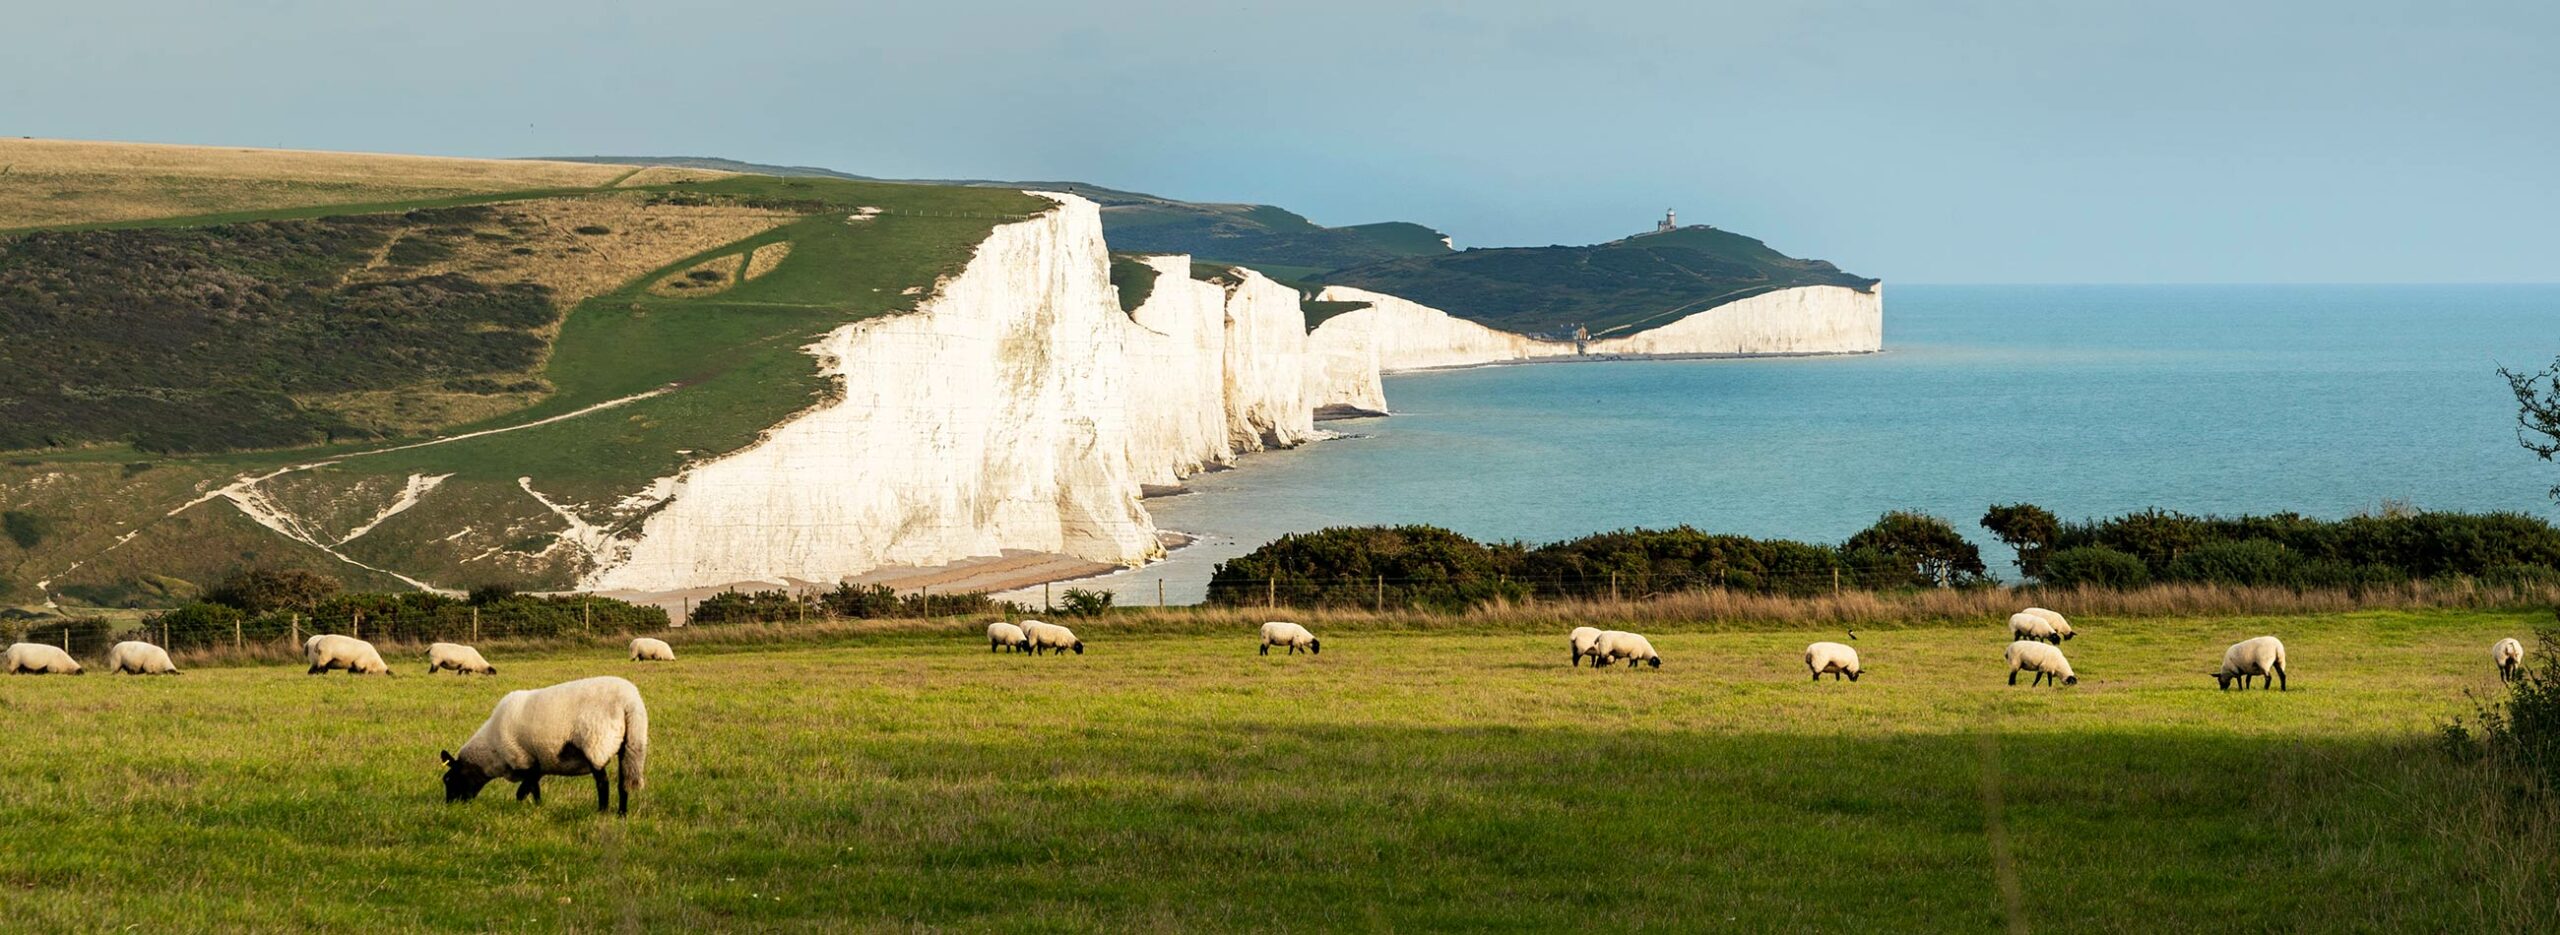 Moutons, Seven Sisters, Sussex, Angleterre, Royaume-Uni / Sheep, Seven Sisters, Sussex, England, UK